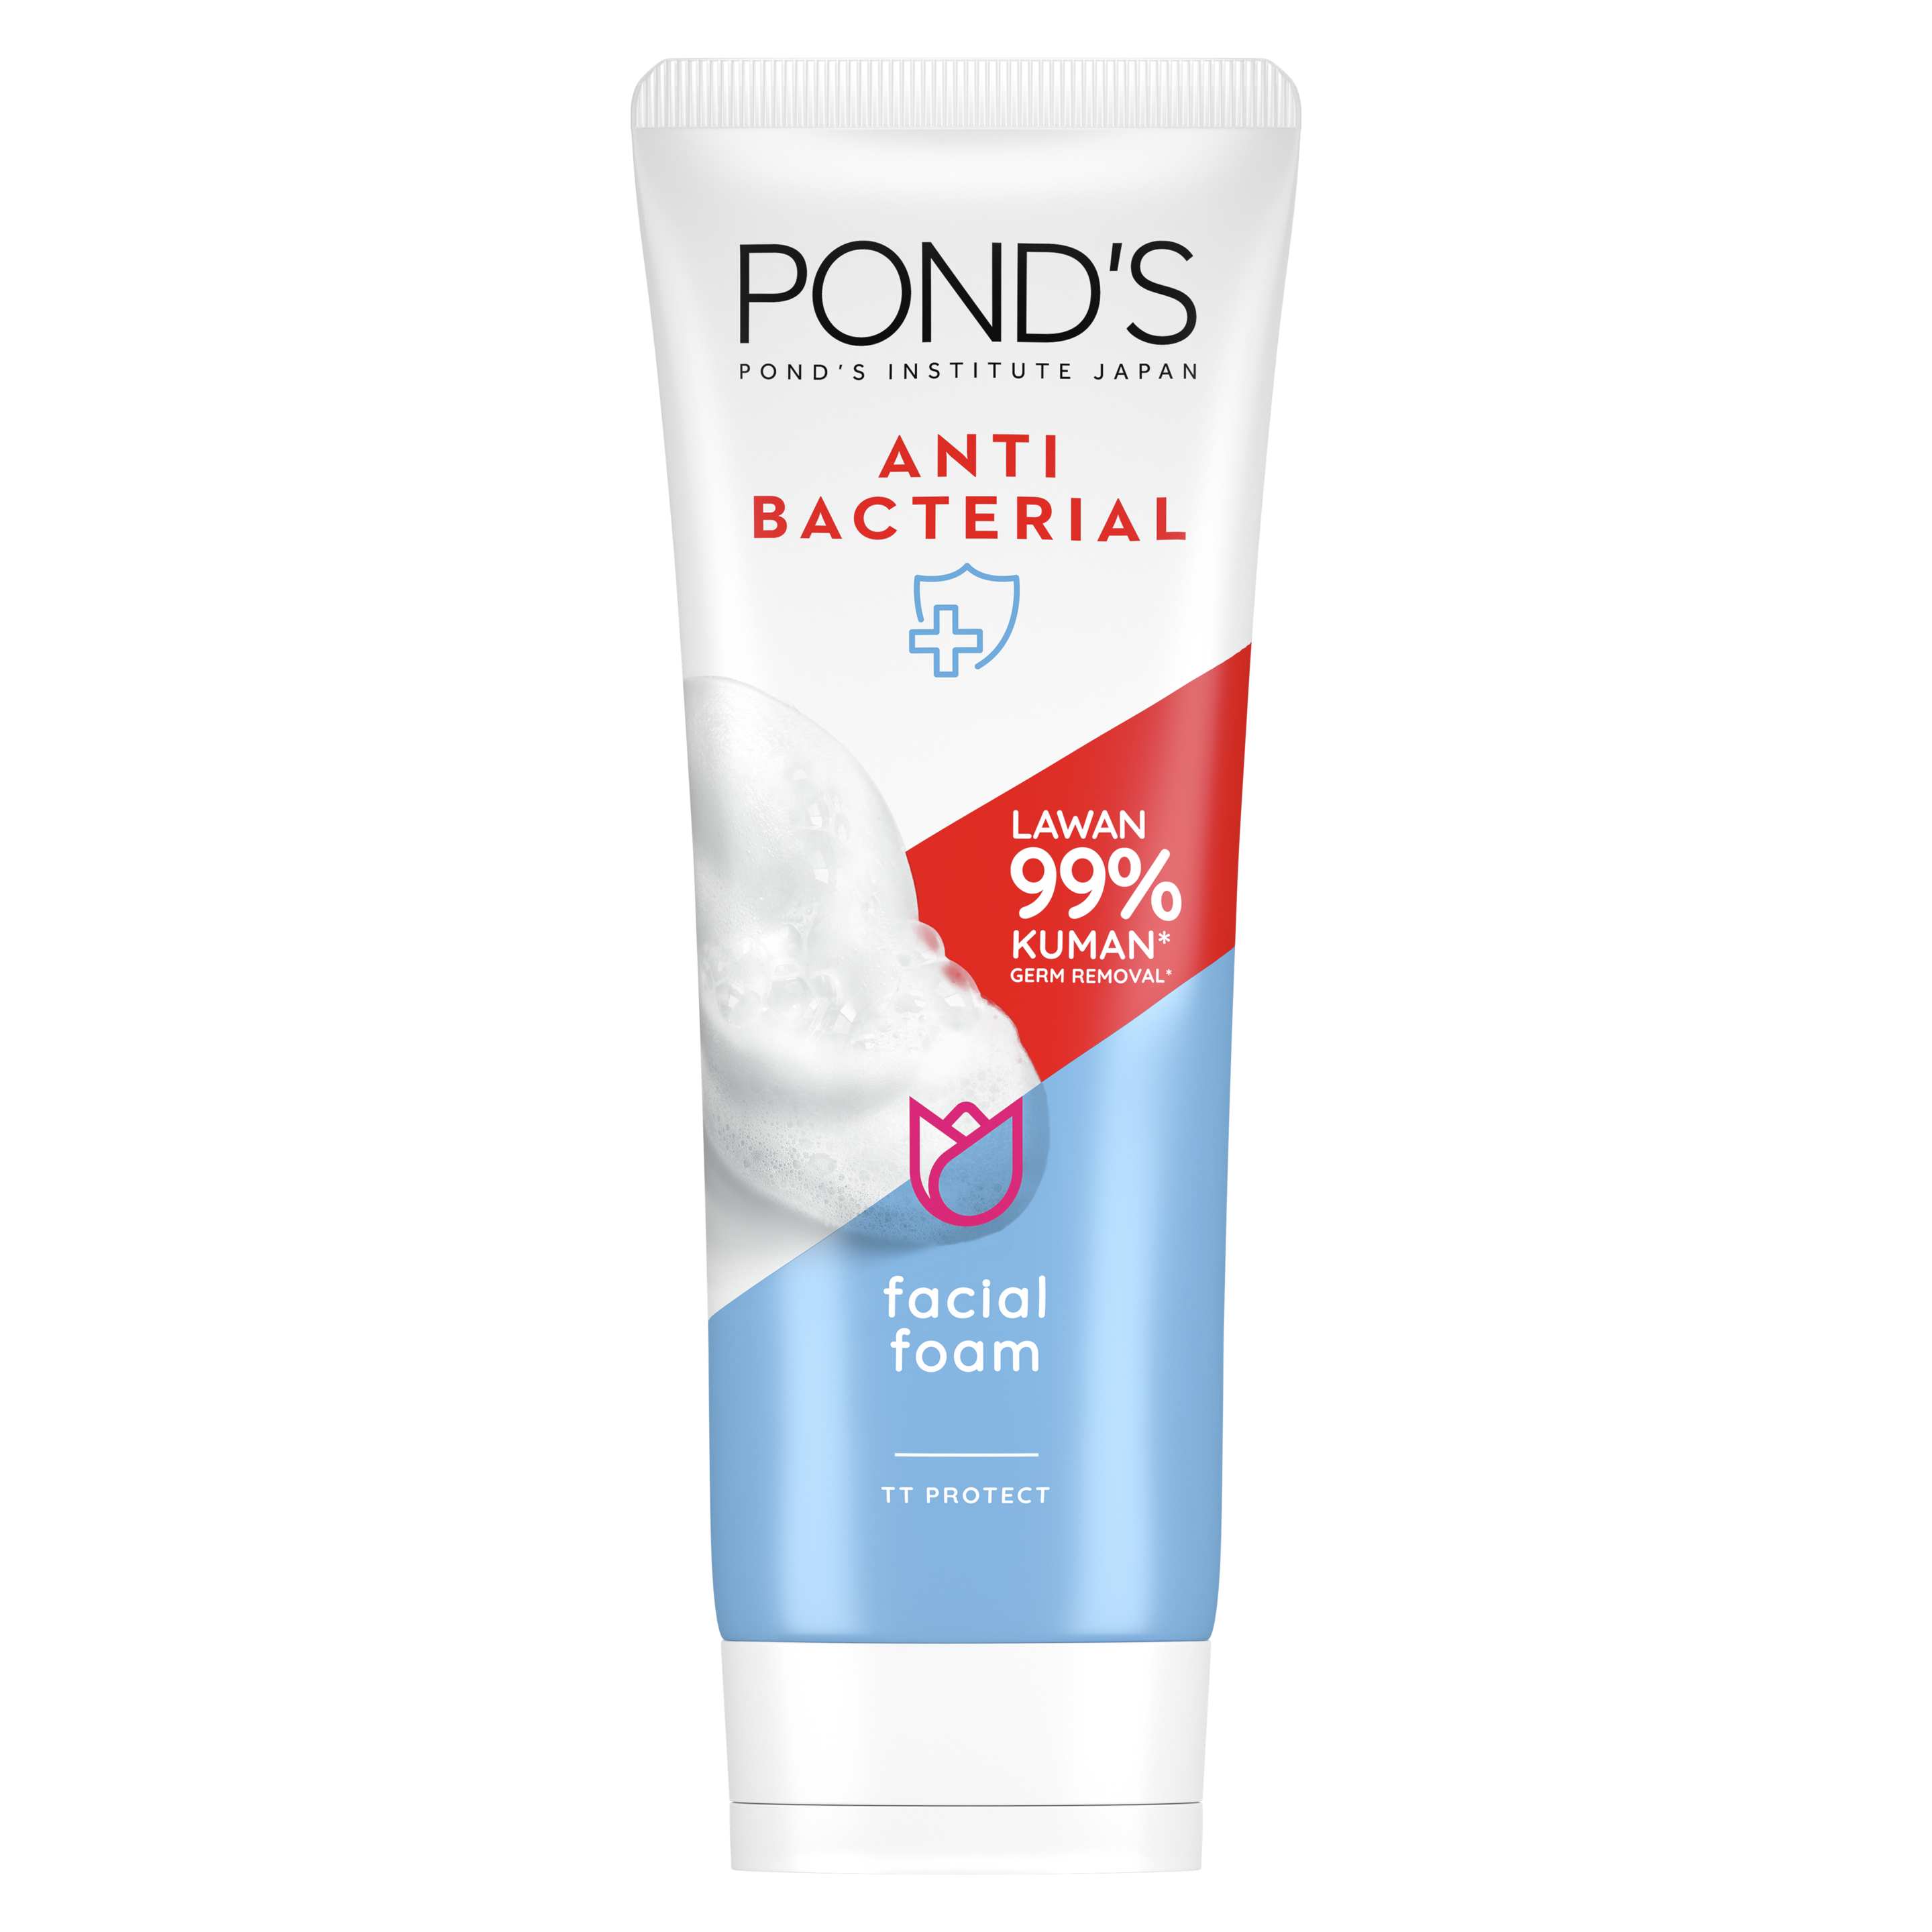 Pond's Anti Bacterial